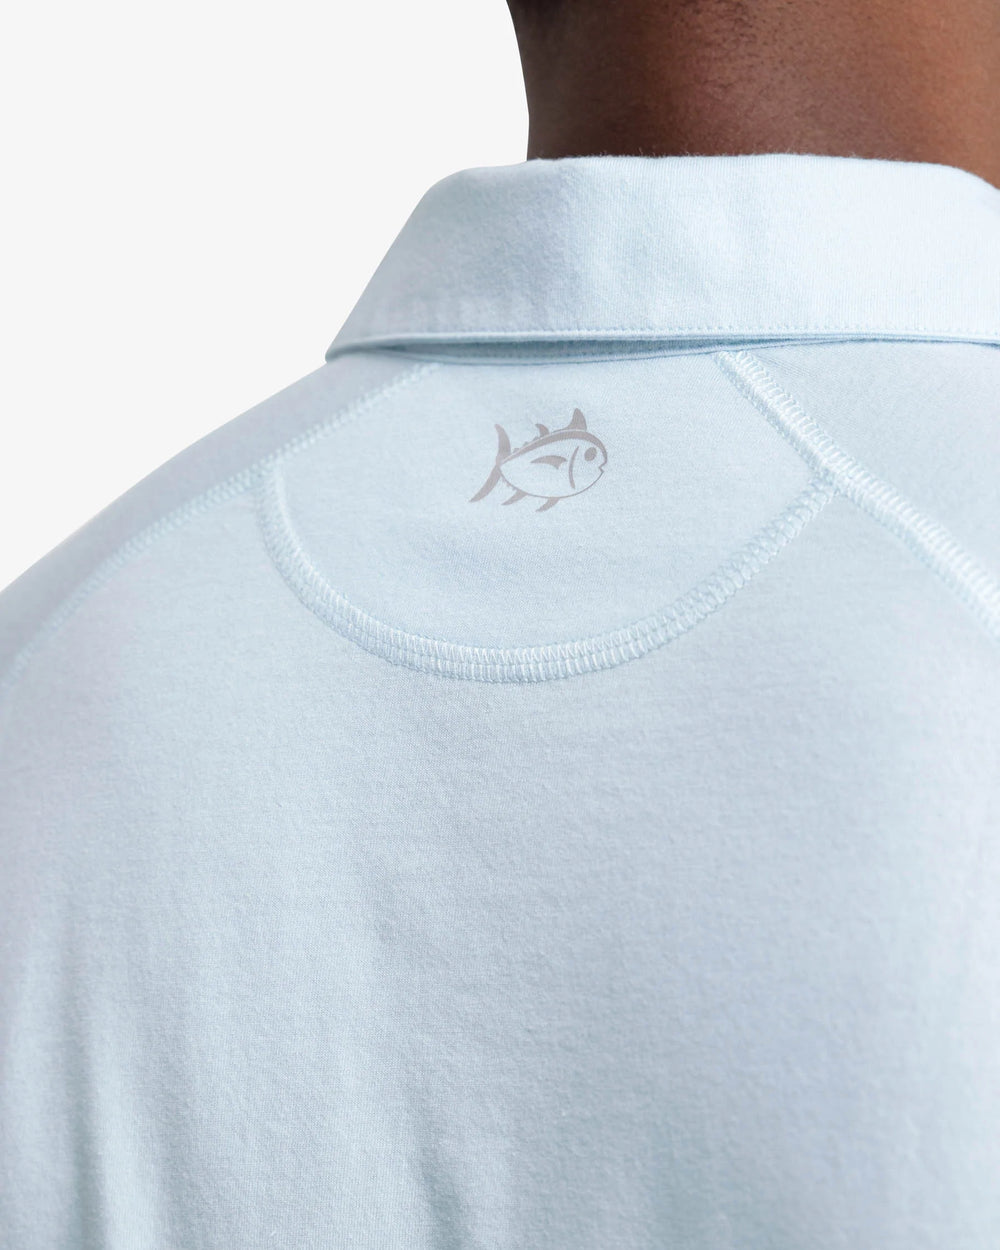 The yoke view of the Racquet Performance Polo Shirt by Southern Tide - Aquamarine